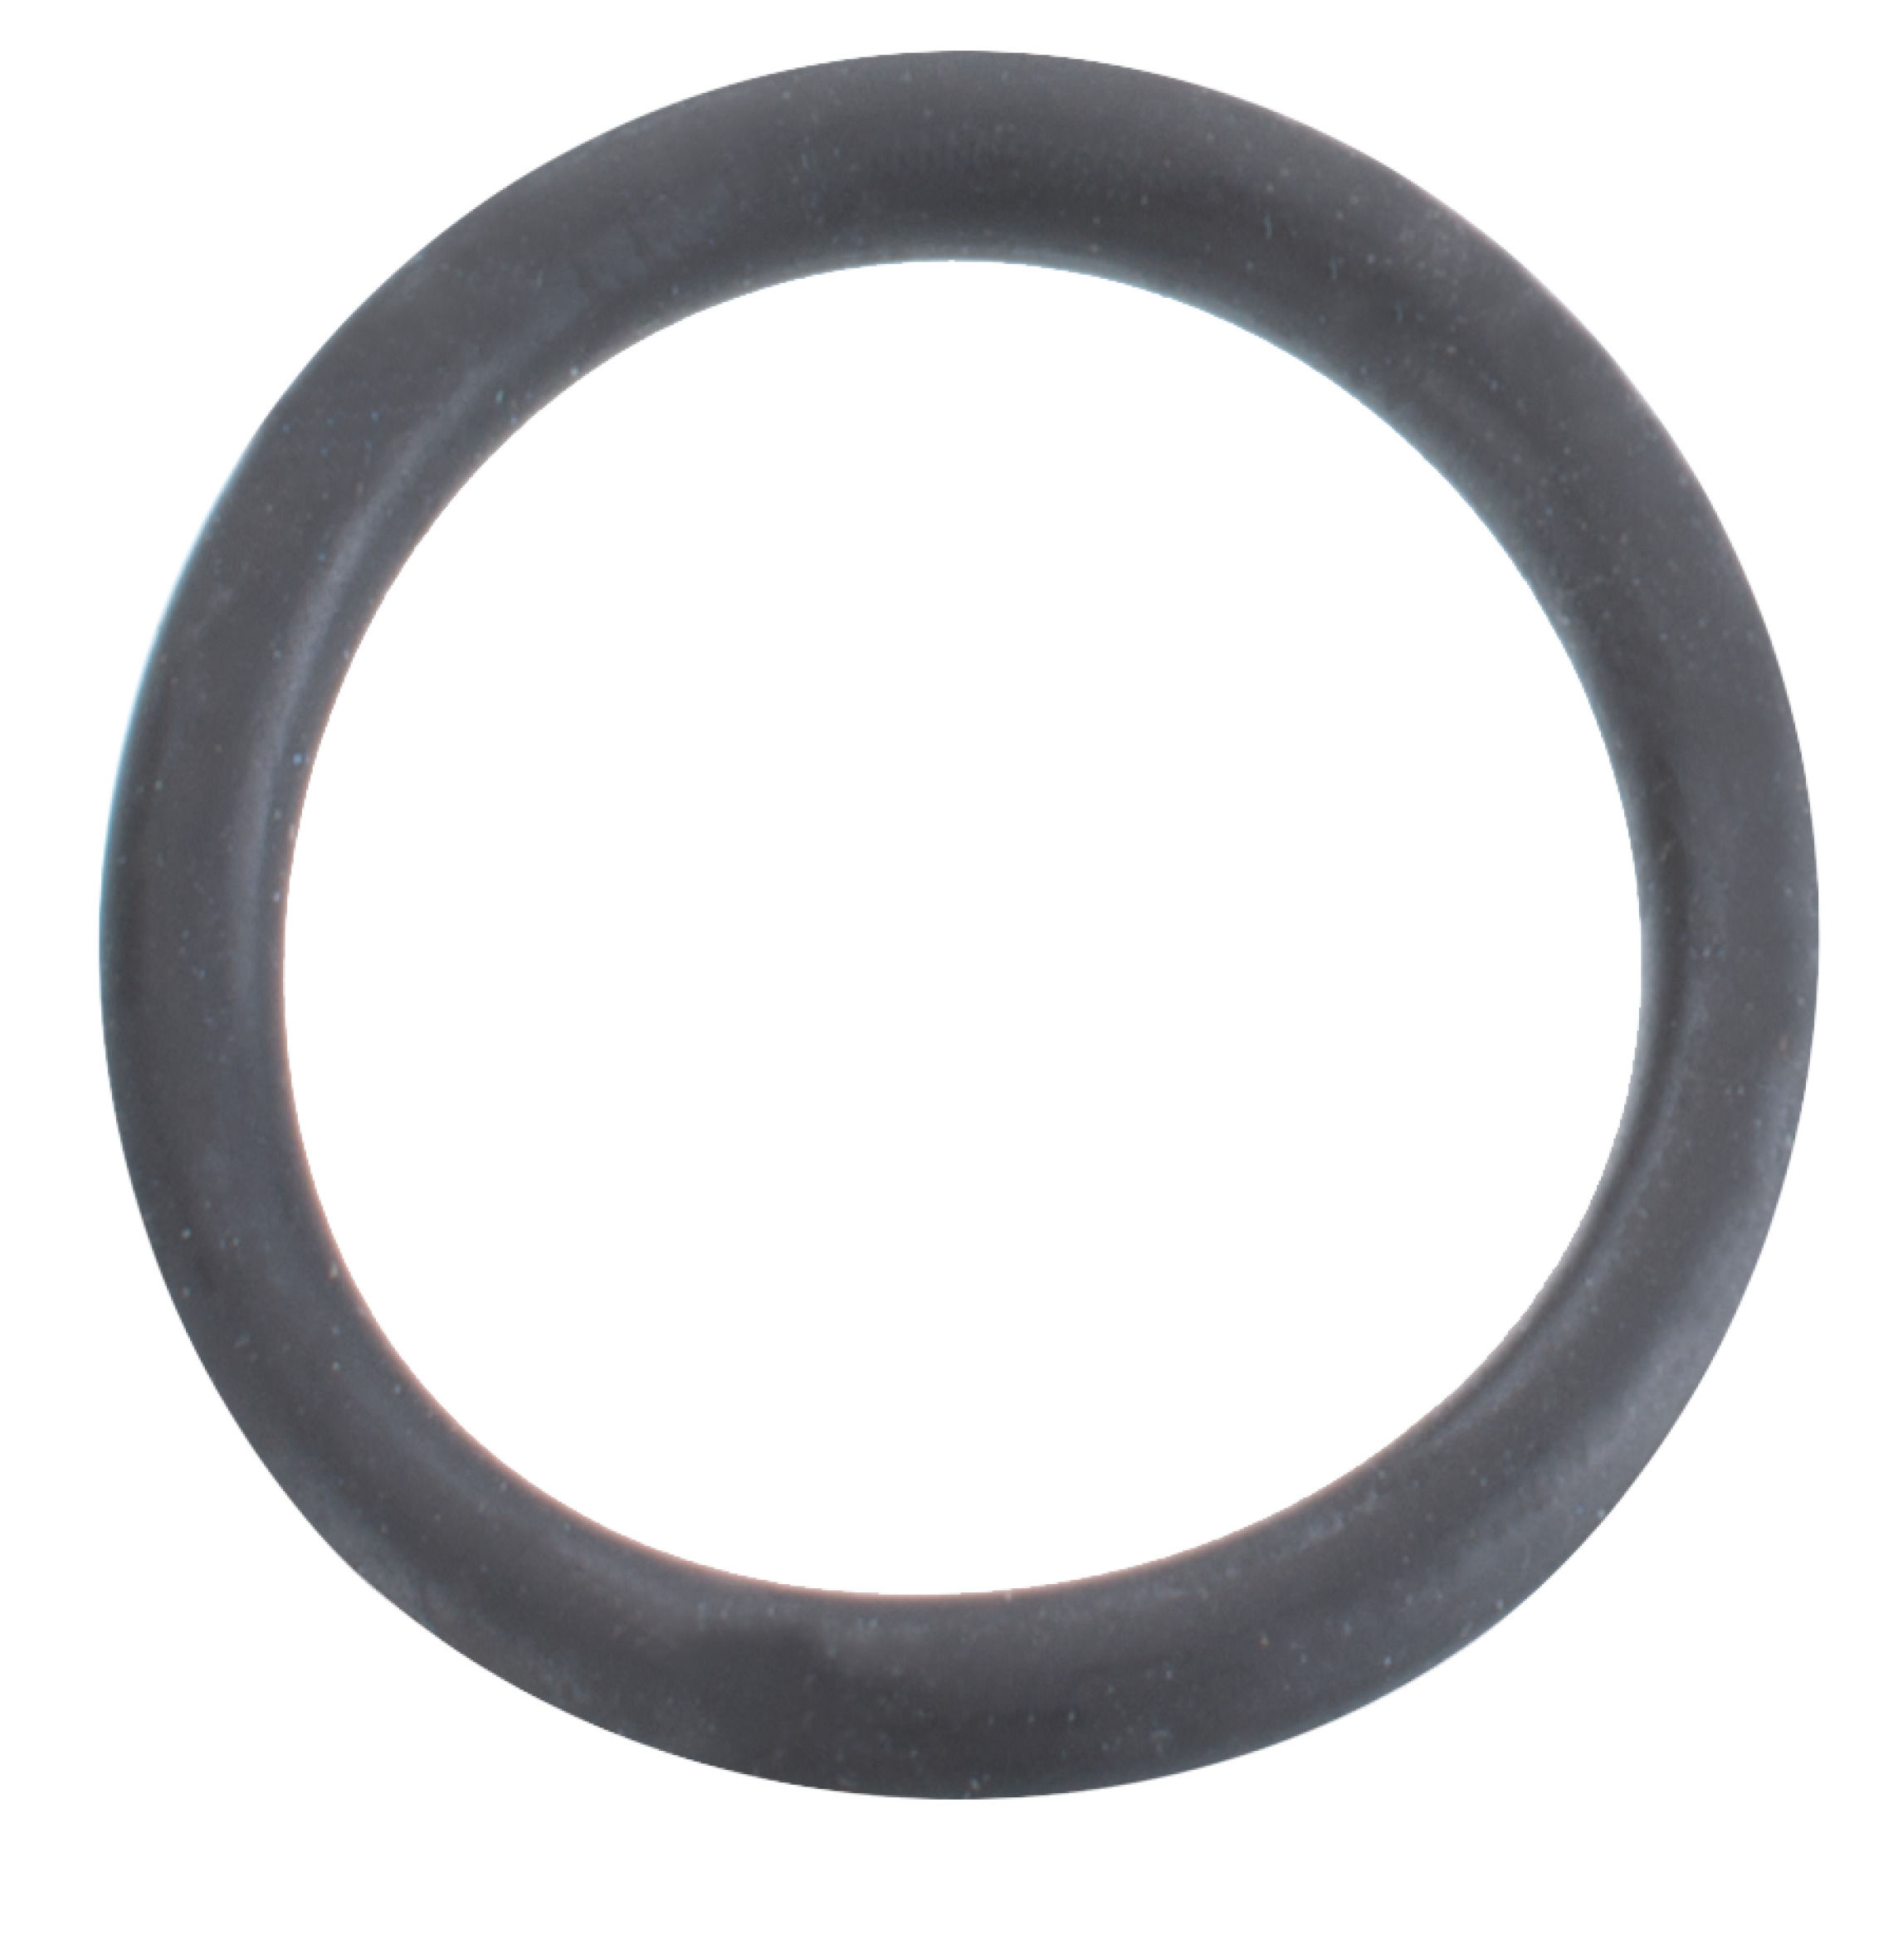   O-RING F.WT EXCENTERSTOPF. 28X4(1)